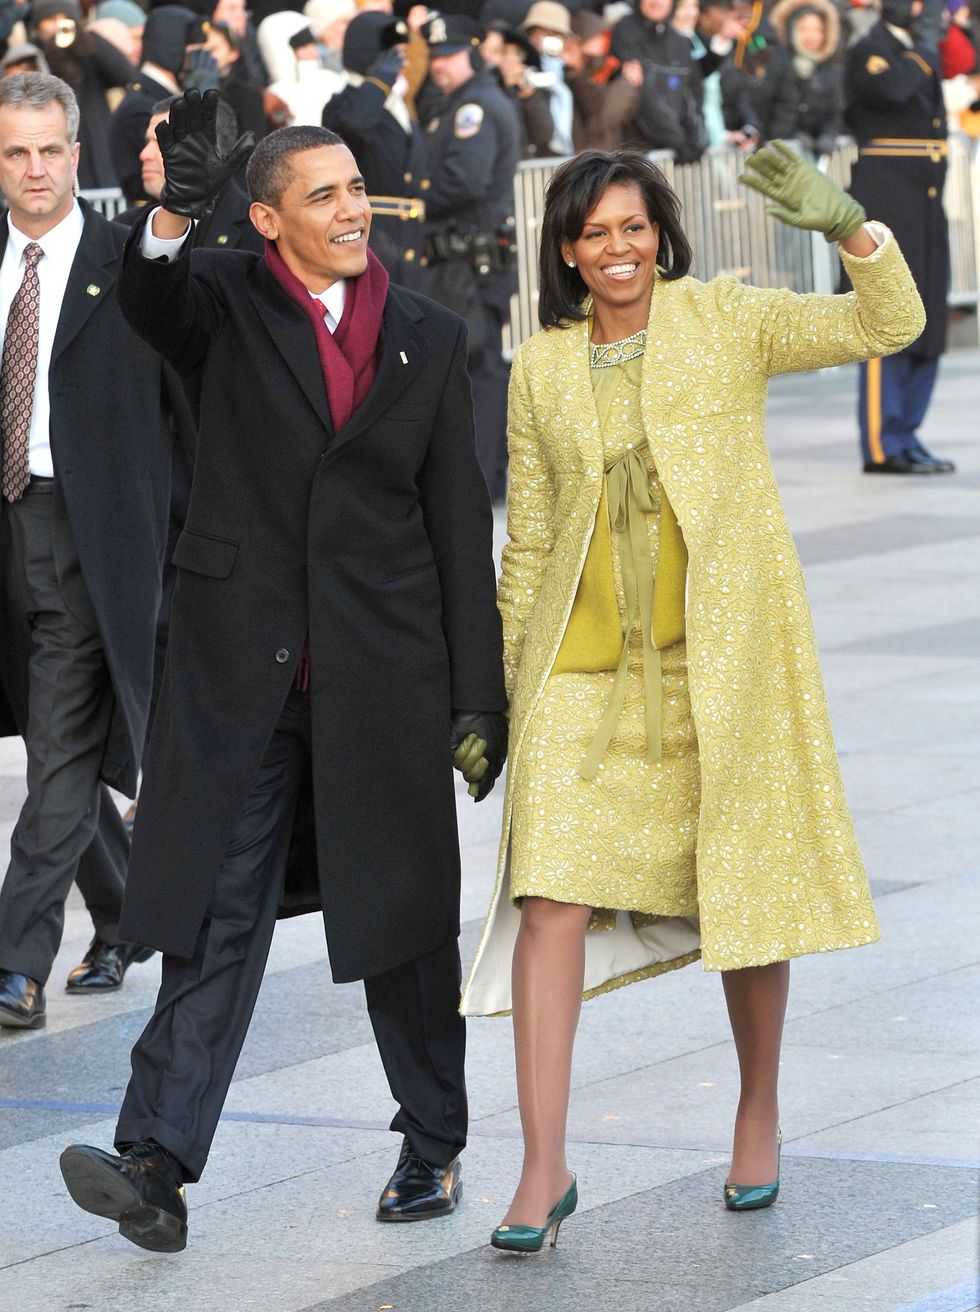 <p><strong data-verified="redactor" data-redactor-tag="strong">When: </strong>January 20, 2009</p>

<p><strong data-verified="redactor" data-redactor-tag="strong">Where: </strong>The Inaugural Parade in Washington, DC</p>

<p><strong data-verified="redactor" data-redactor-tag="strong">Wearing: </strong>Isabel Toledo dress and coat, Nina Ricci cardigan, Jimmy Choo heels, and J. Crew leather gloves</p>

<p><strong data-verified="redactor" data-redactor-tag="strong"></strong><strong data-verified="redactor" data-redactor-tag="strong">Why it mattered: </strong>For Inauguration Day, Michelle chose a lemongrass ensemble designed by Isabel Toledo. The color is unusual but uplifting—again keeping in line with the message of her husband's campaign. Also significant was the designer, Cuban-born Toledo whose name, though beloved by fashion insiders, is far from a household one. "First ladies traditionally stick to one designer, but Mrs. Obama made a point of wearing clothes from a wide range of young, multi-cultural designers which sent a message of inclusiveness and great support for the fashion industry," notes Betts.<strong data-verified="redactor" data-redactor-tag="strong"></strong></p>